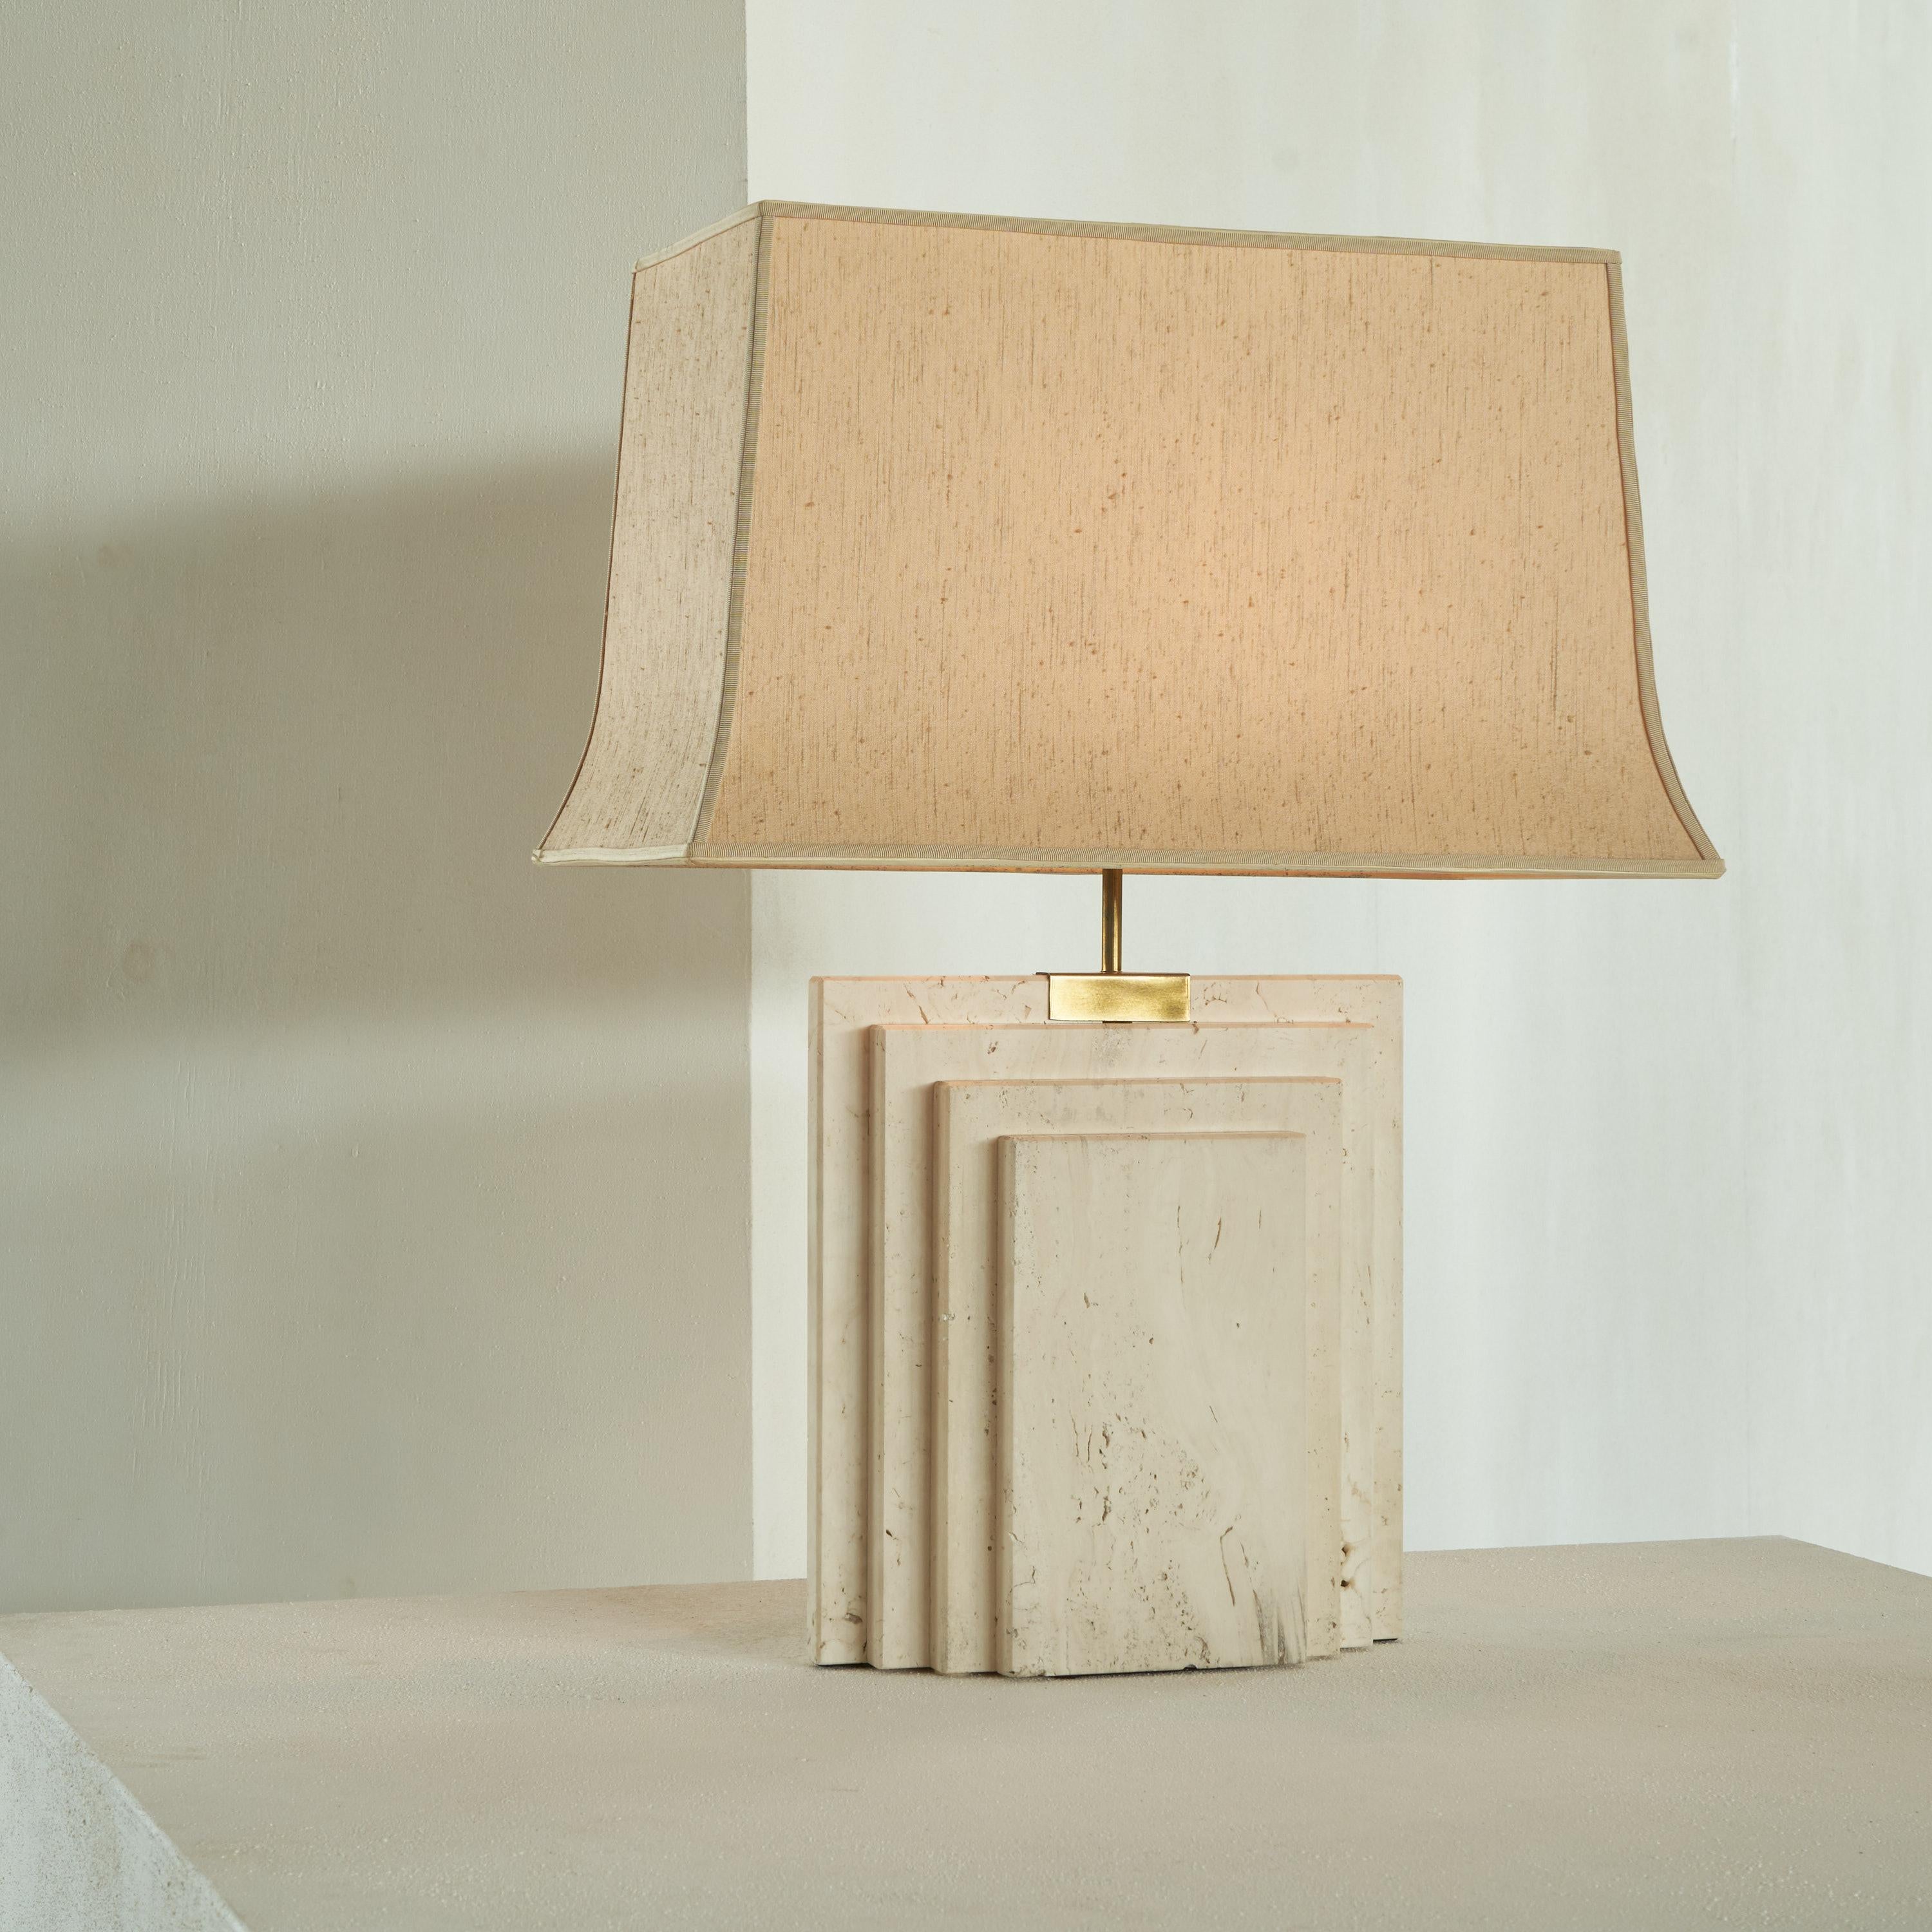 Belgian Architectural Table Lamp in Travertine and Brass, Belgium, 1970s For Sale